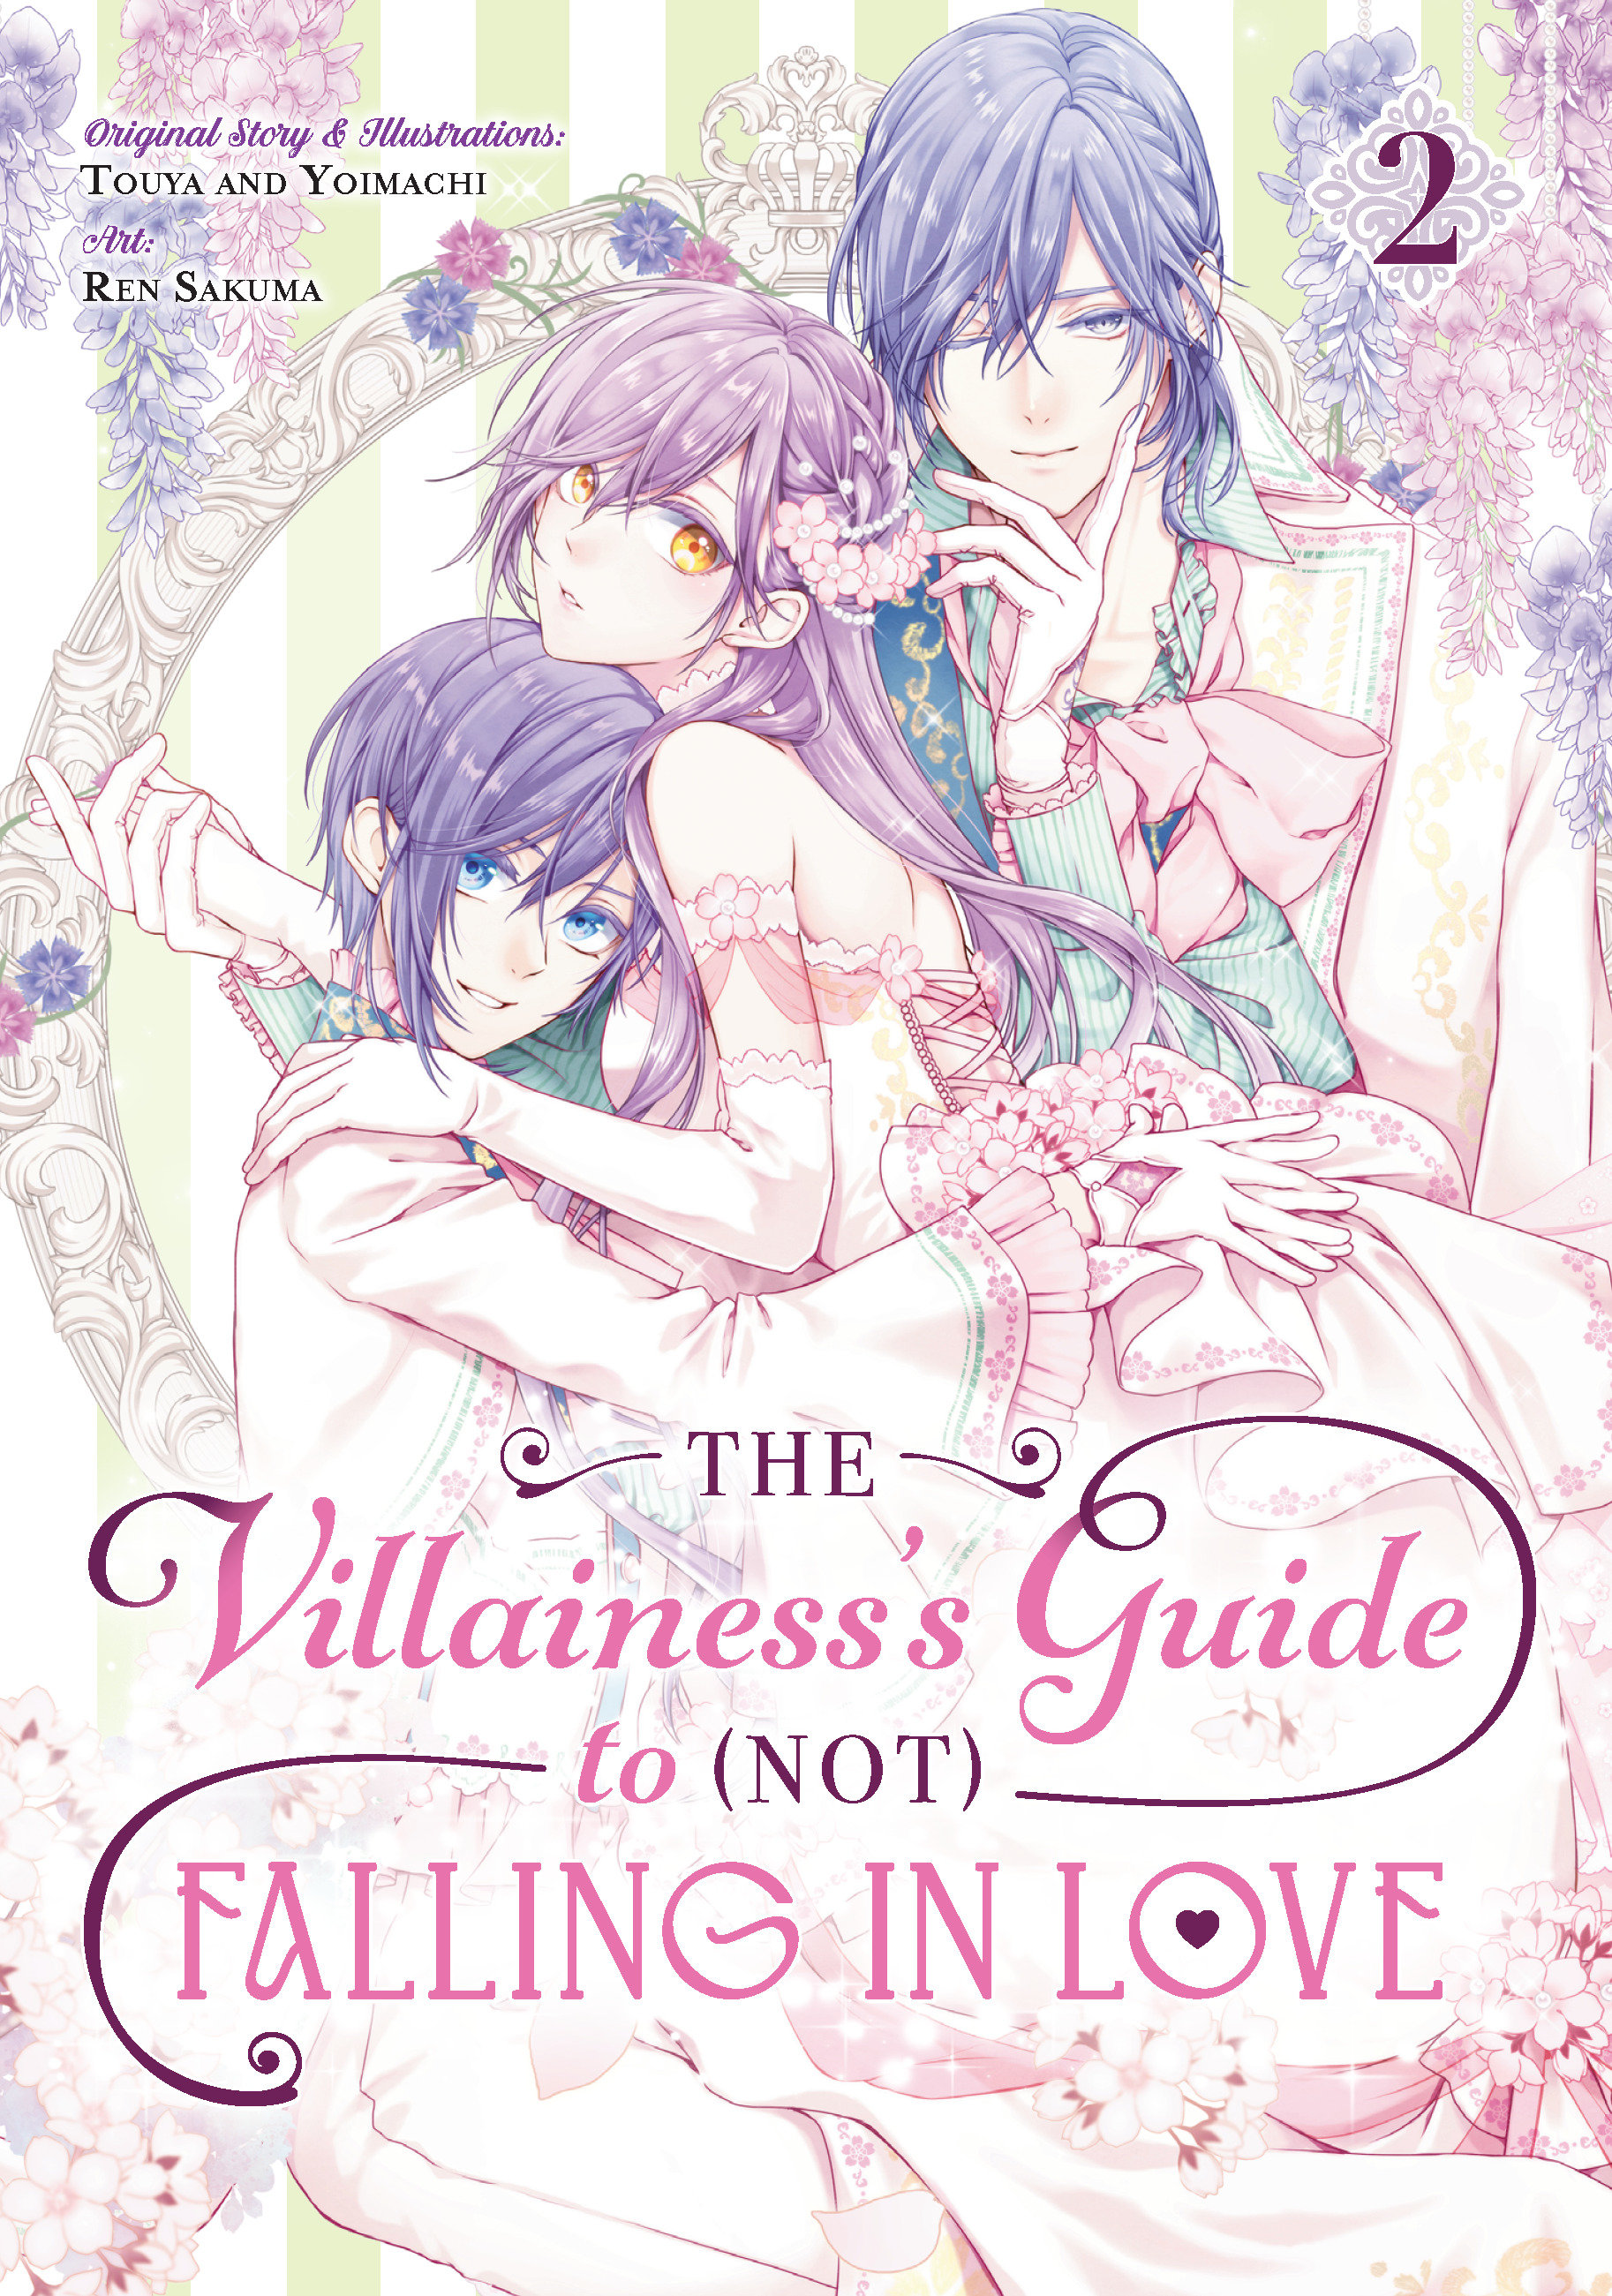 The Villainess's Guide to (Not) Falling in Love Manga Volume 2 (Manga)